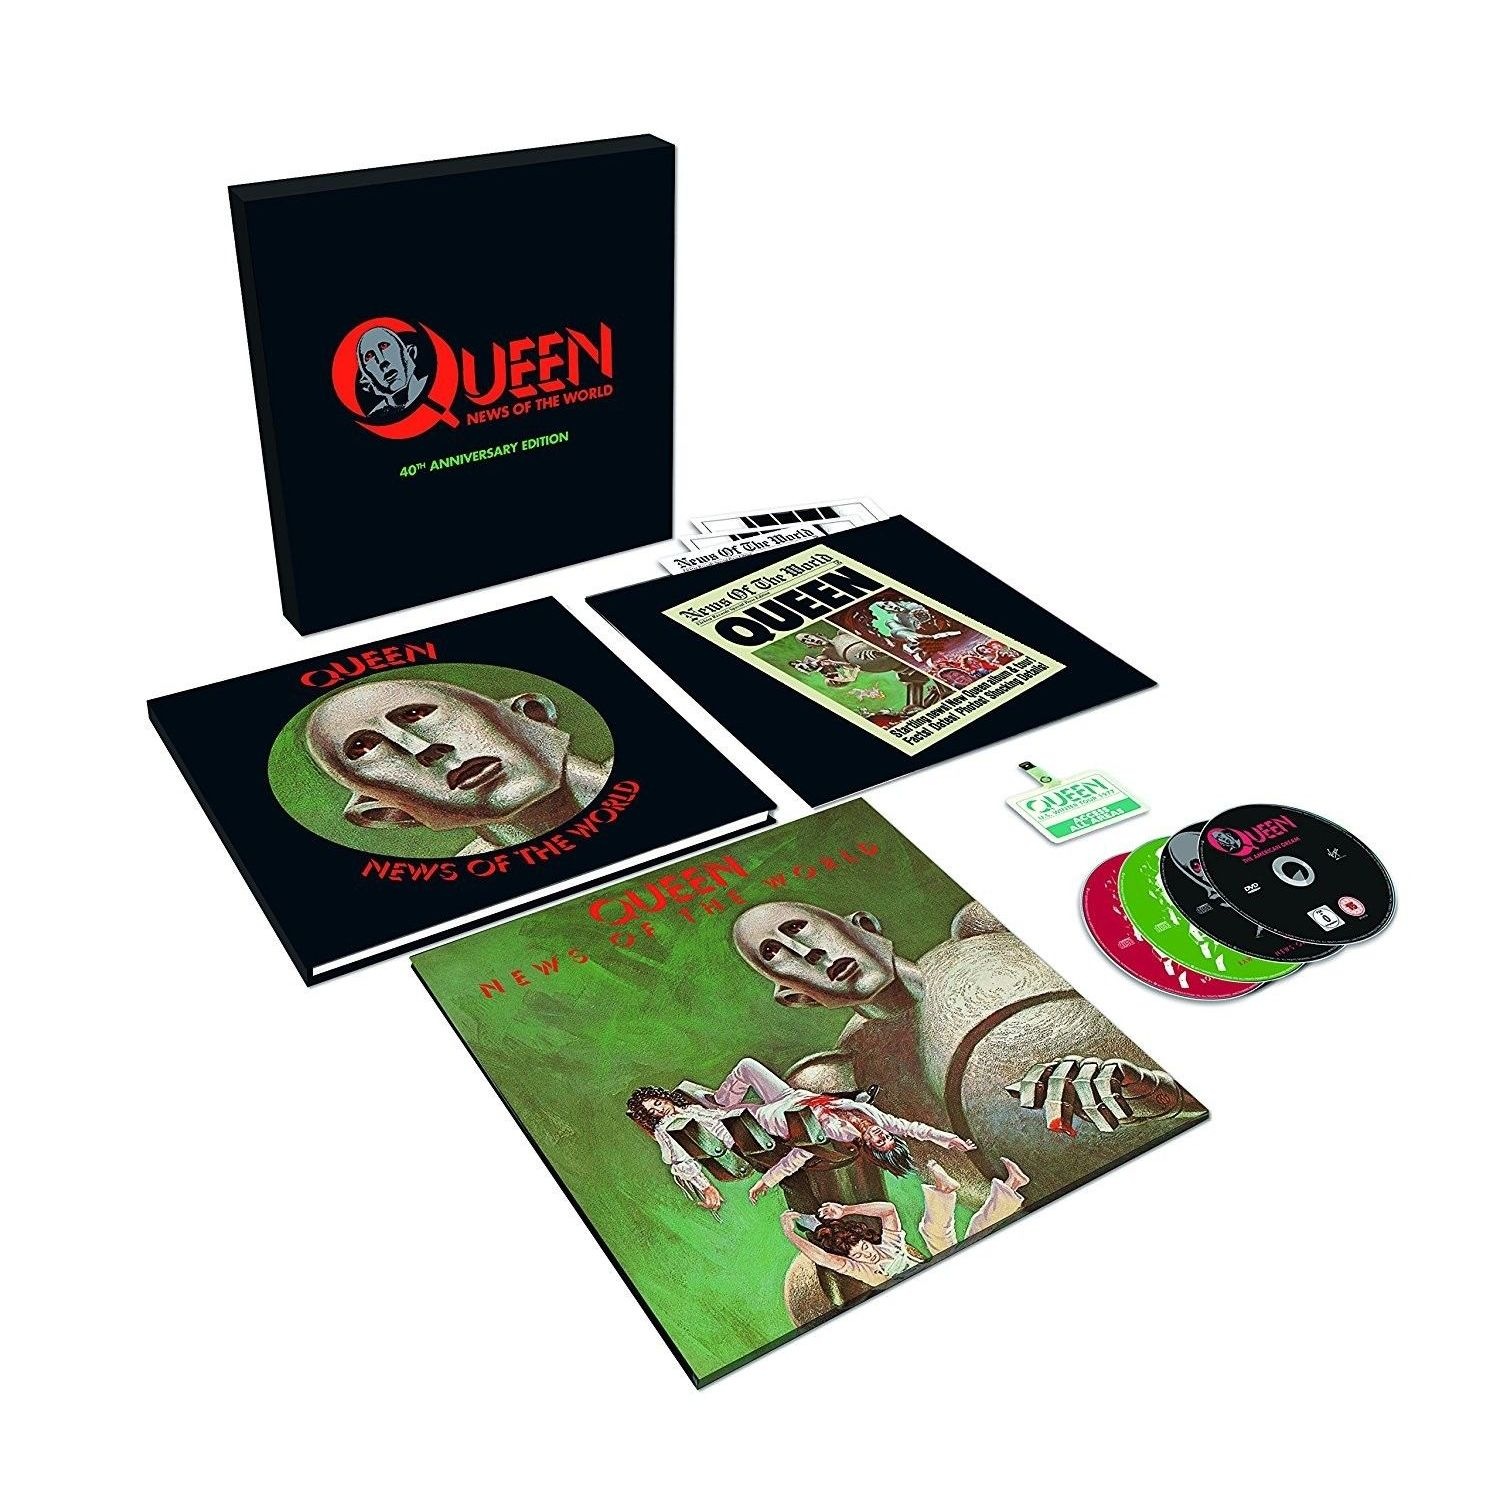 QUEEN - NEWS OF THE WORLD (40TH ANNIVERSARY) (LP+3 CD+DVD ...